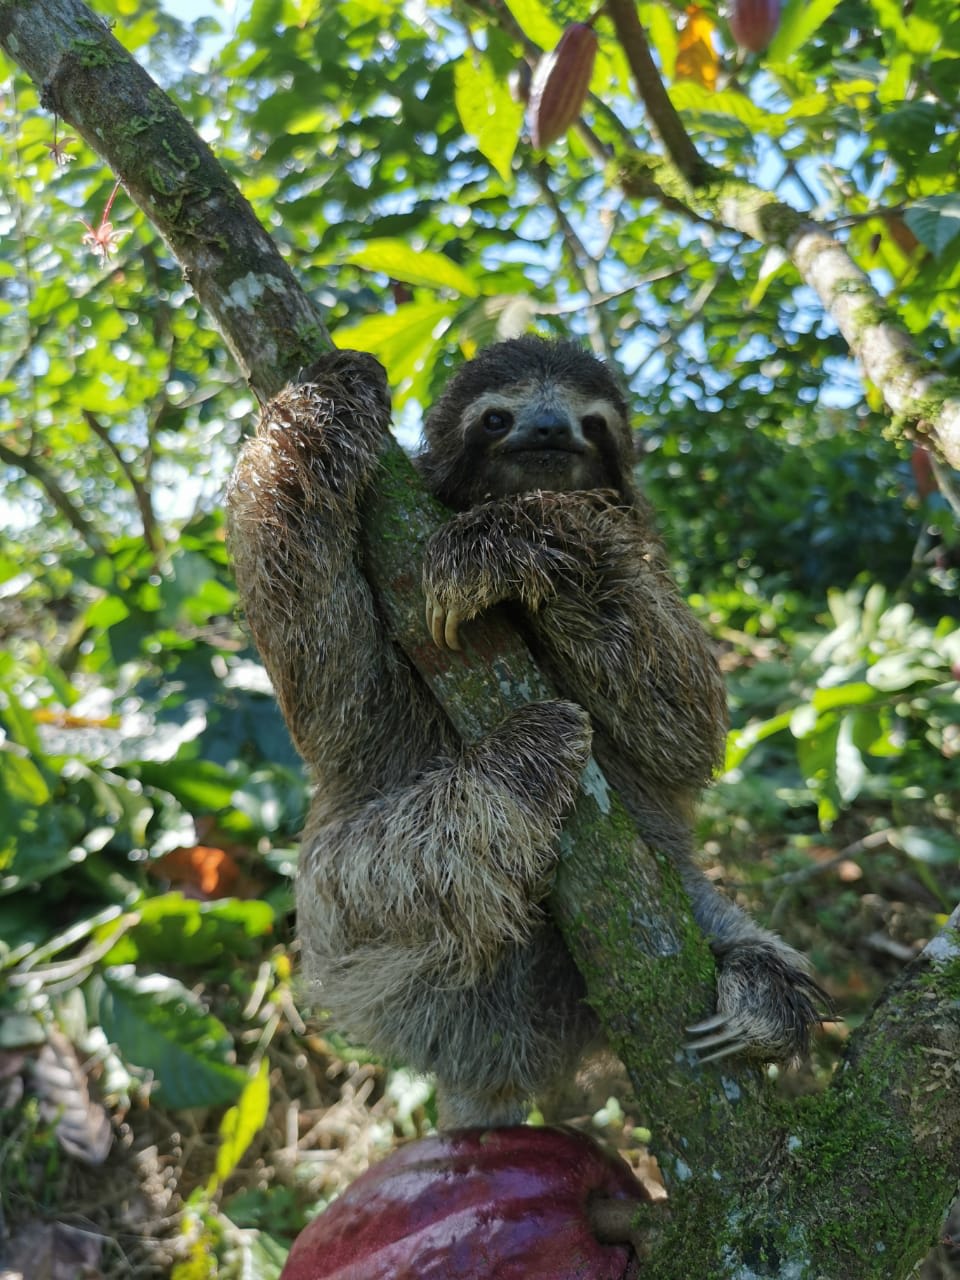 A sloth relaxing in his home